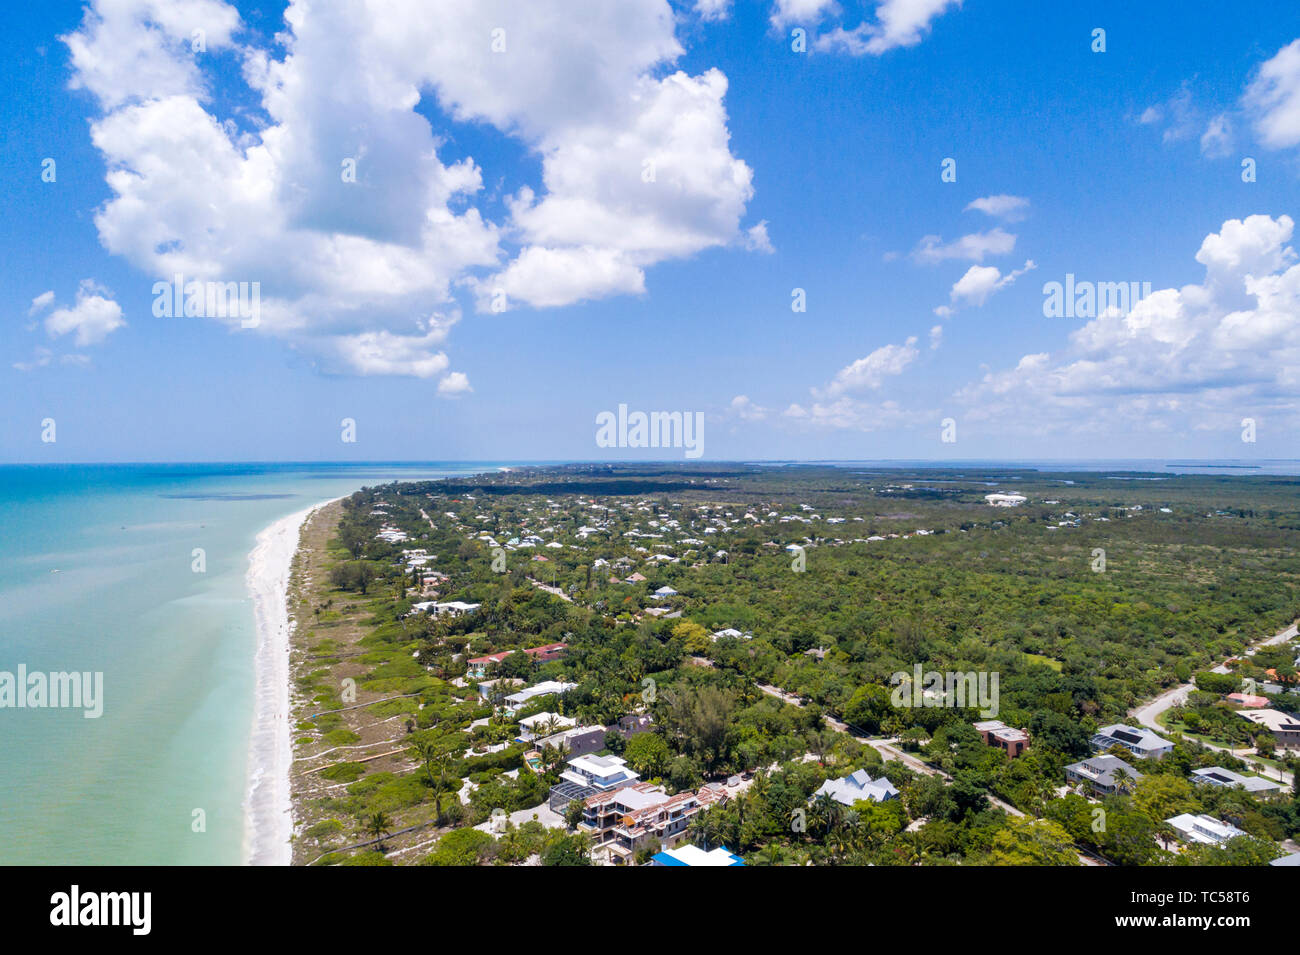 Sanibel Island Florida,Gulf of Mexico beach,West Gulf Drive homes resorts hotels,aerial overhead view,FL190514d06 Stock Photo